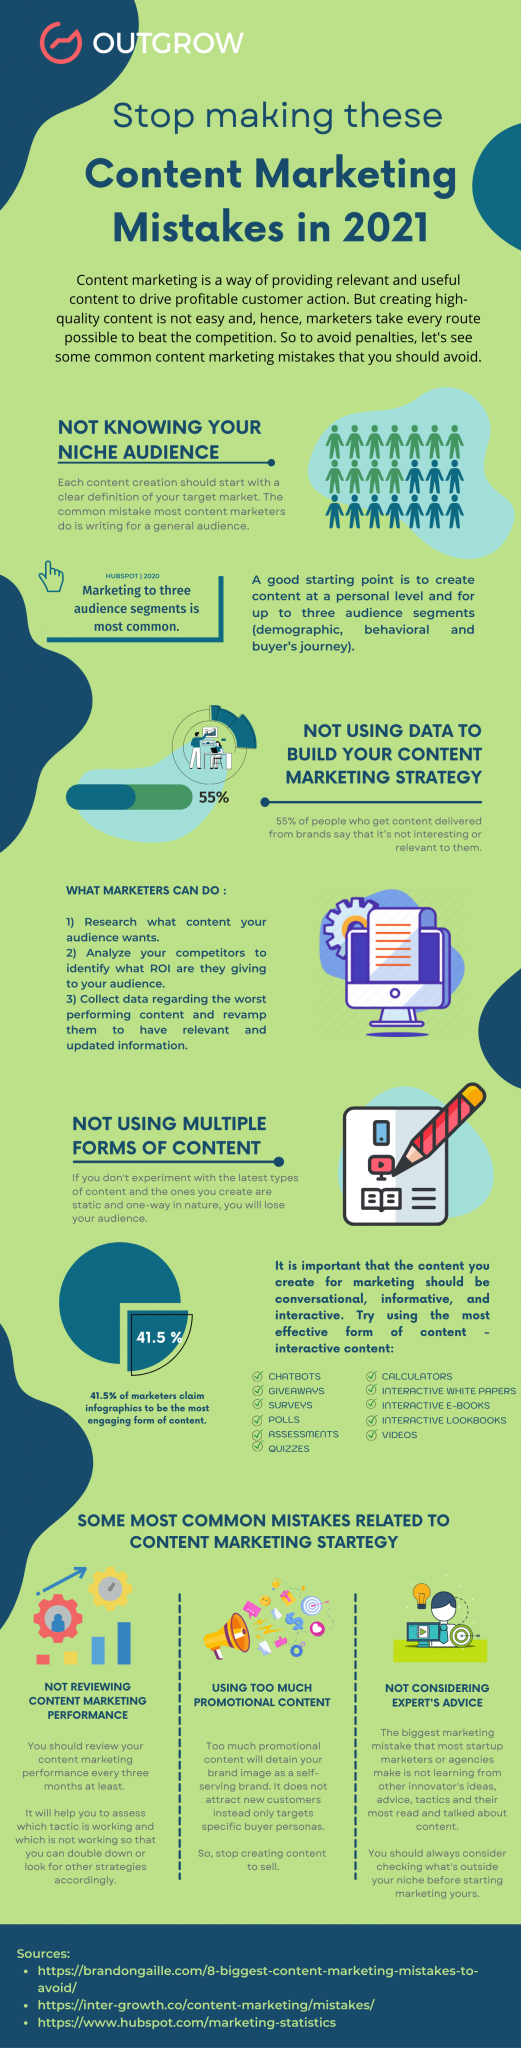 Content marketing mistakes that you should avoid